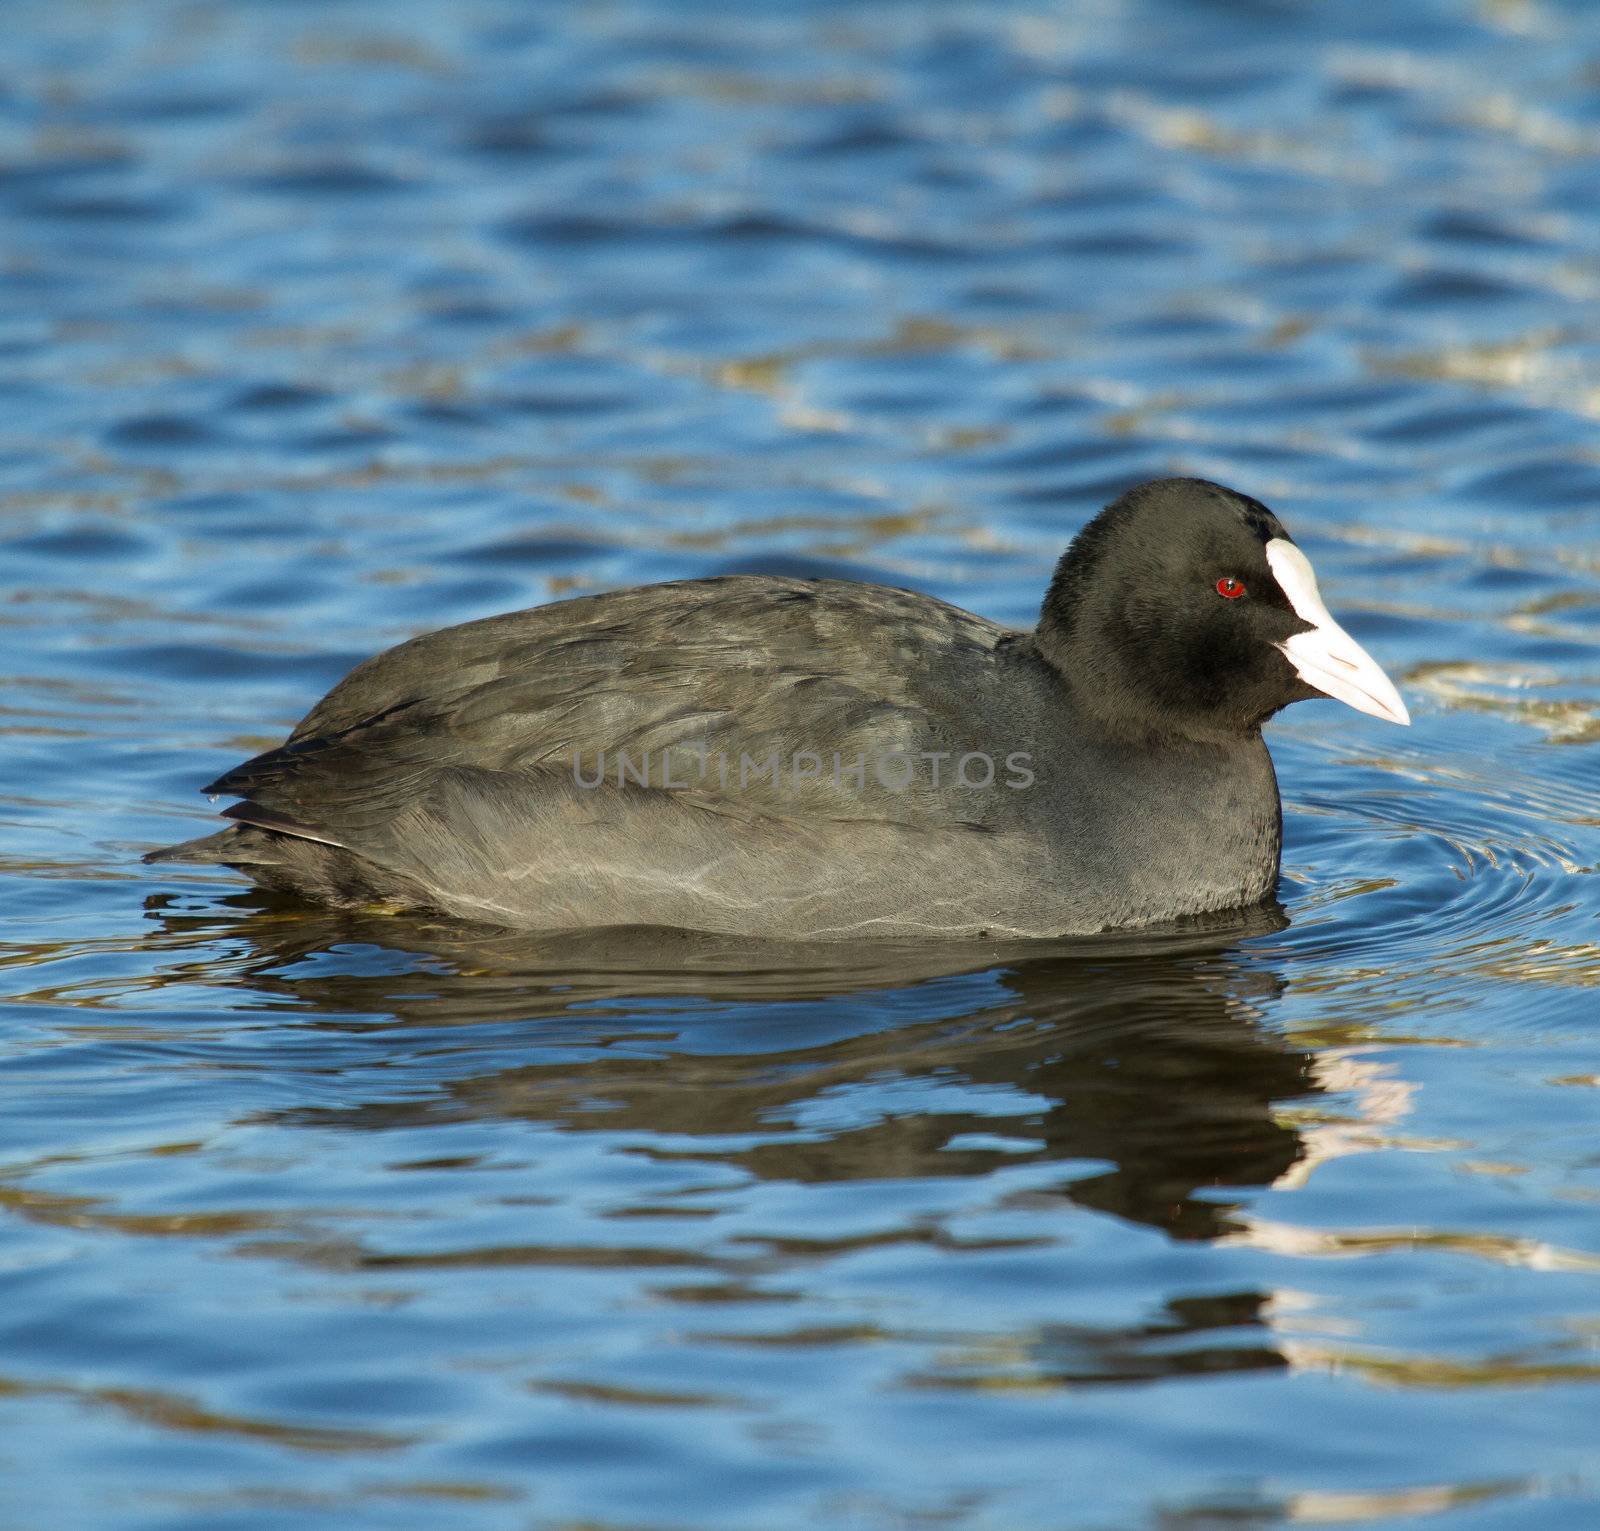 A common coot in the water by michaklootwijk